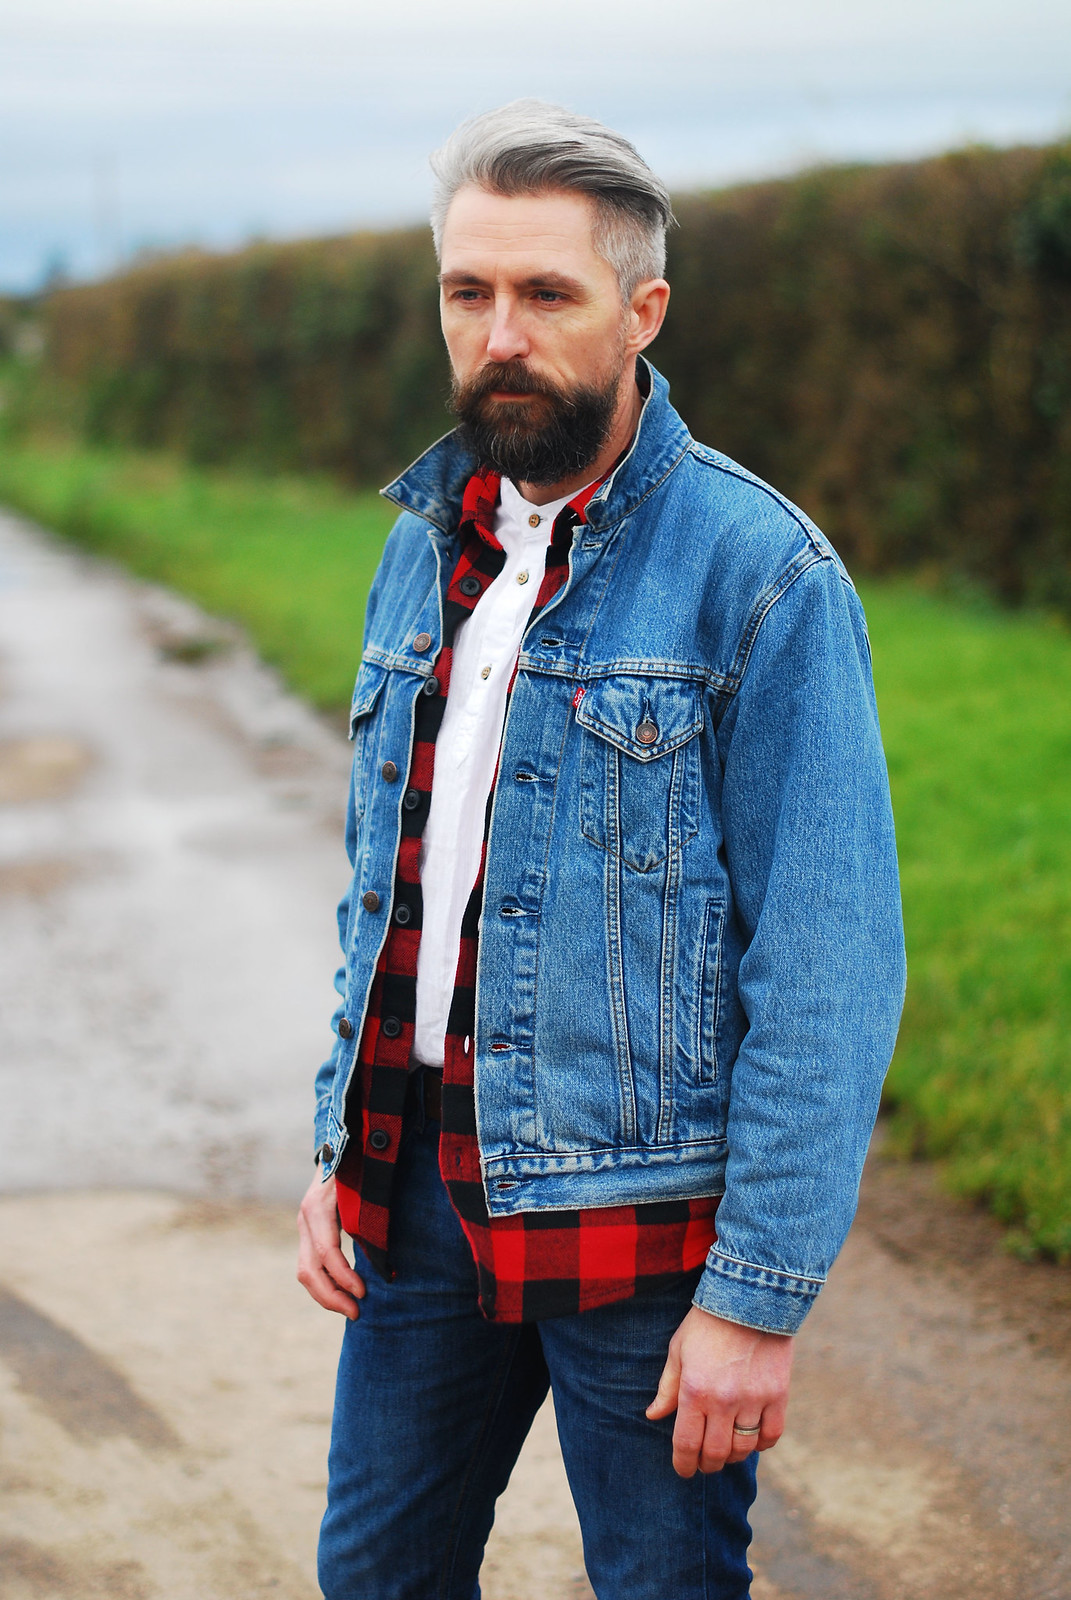 Casual weekend outfit \ denim jean jacket \ check (buffalo plaid) shirt \ skinny jeans \ brown lace up boots | Silver Londoner, over 40 menswear